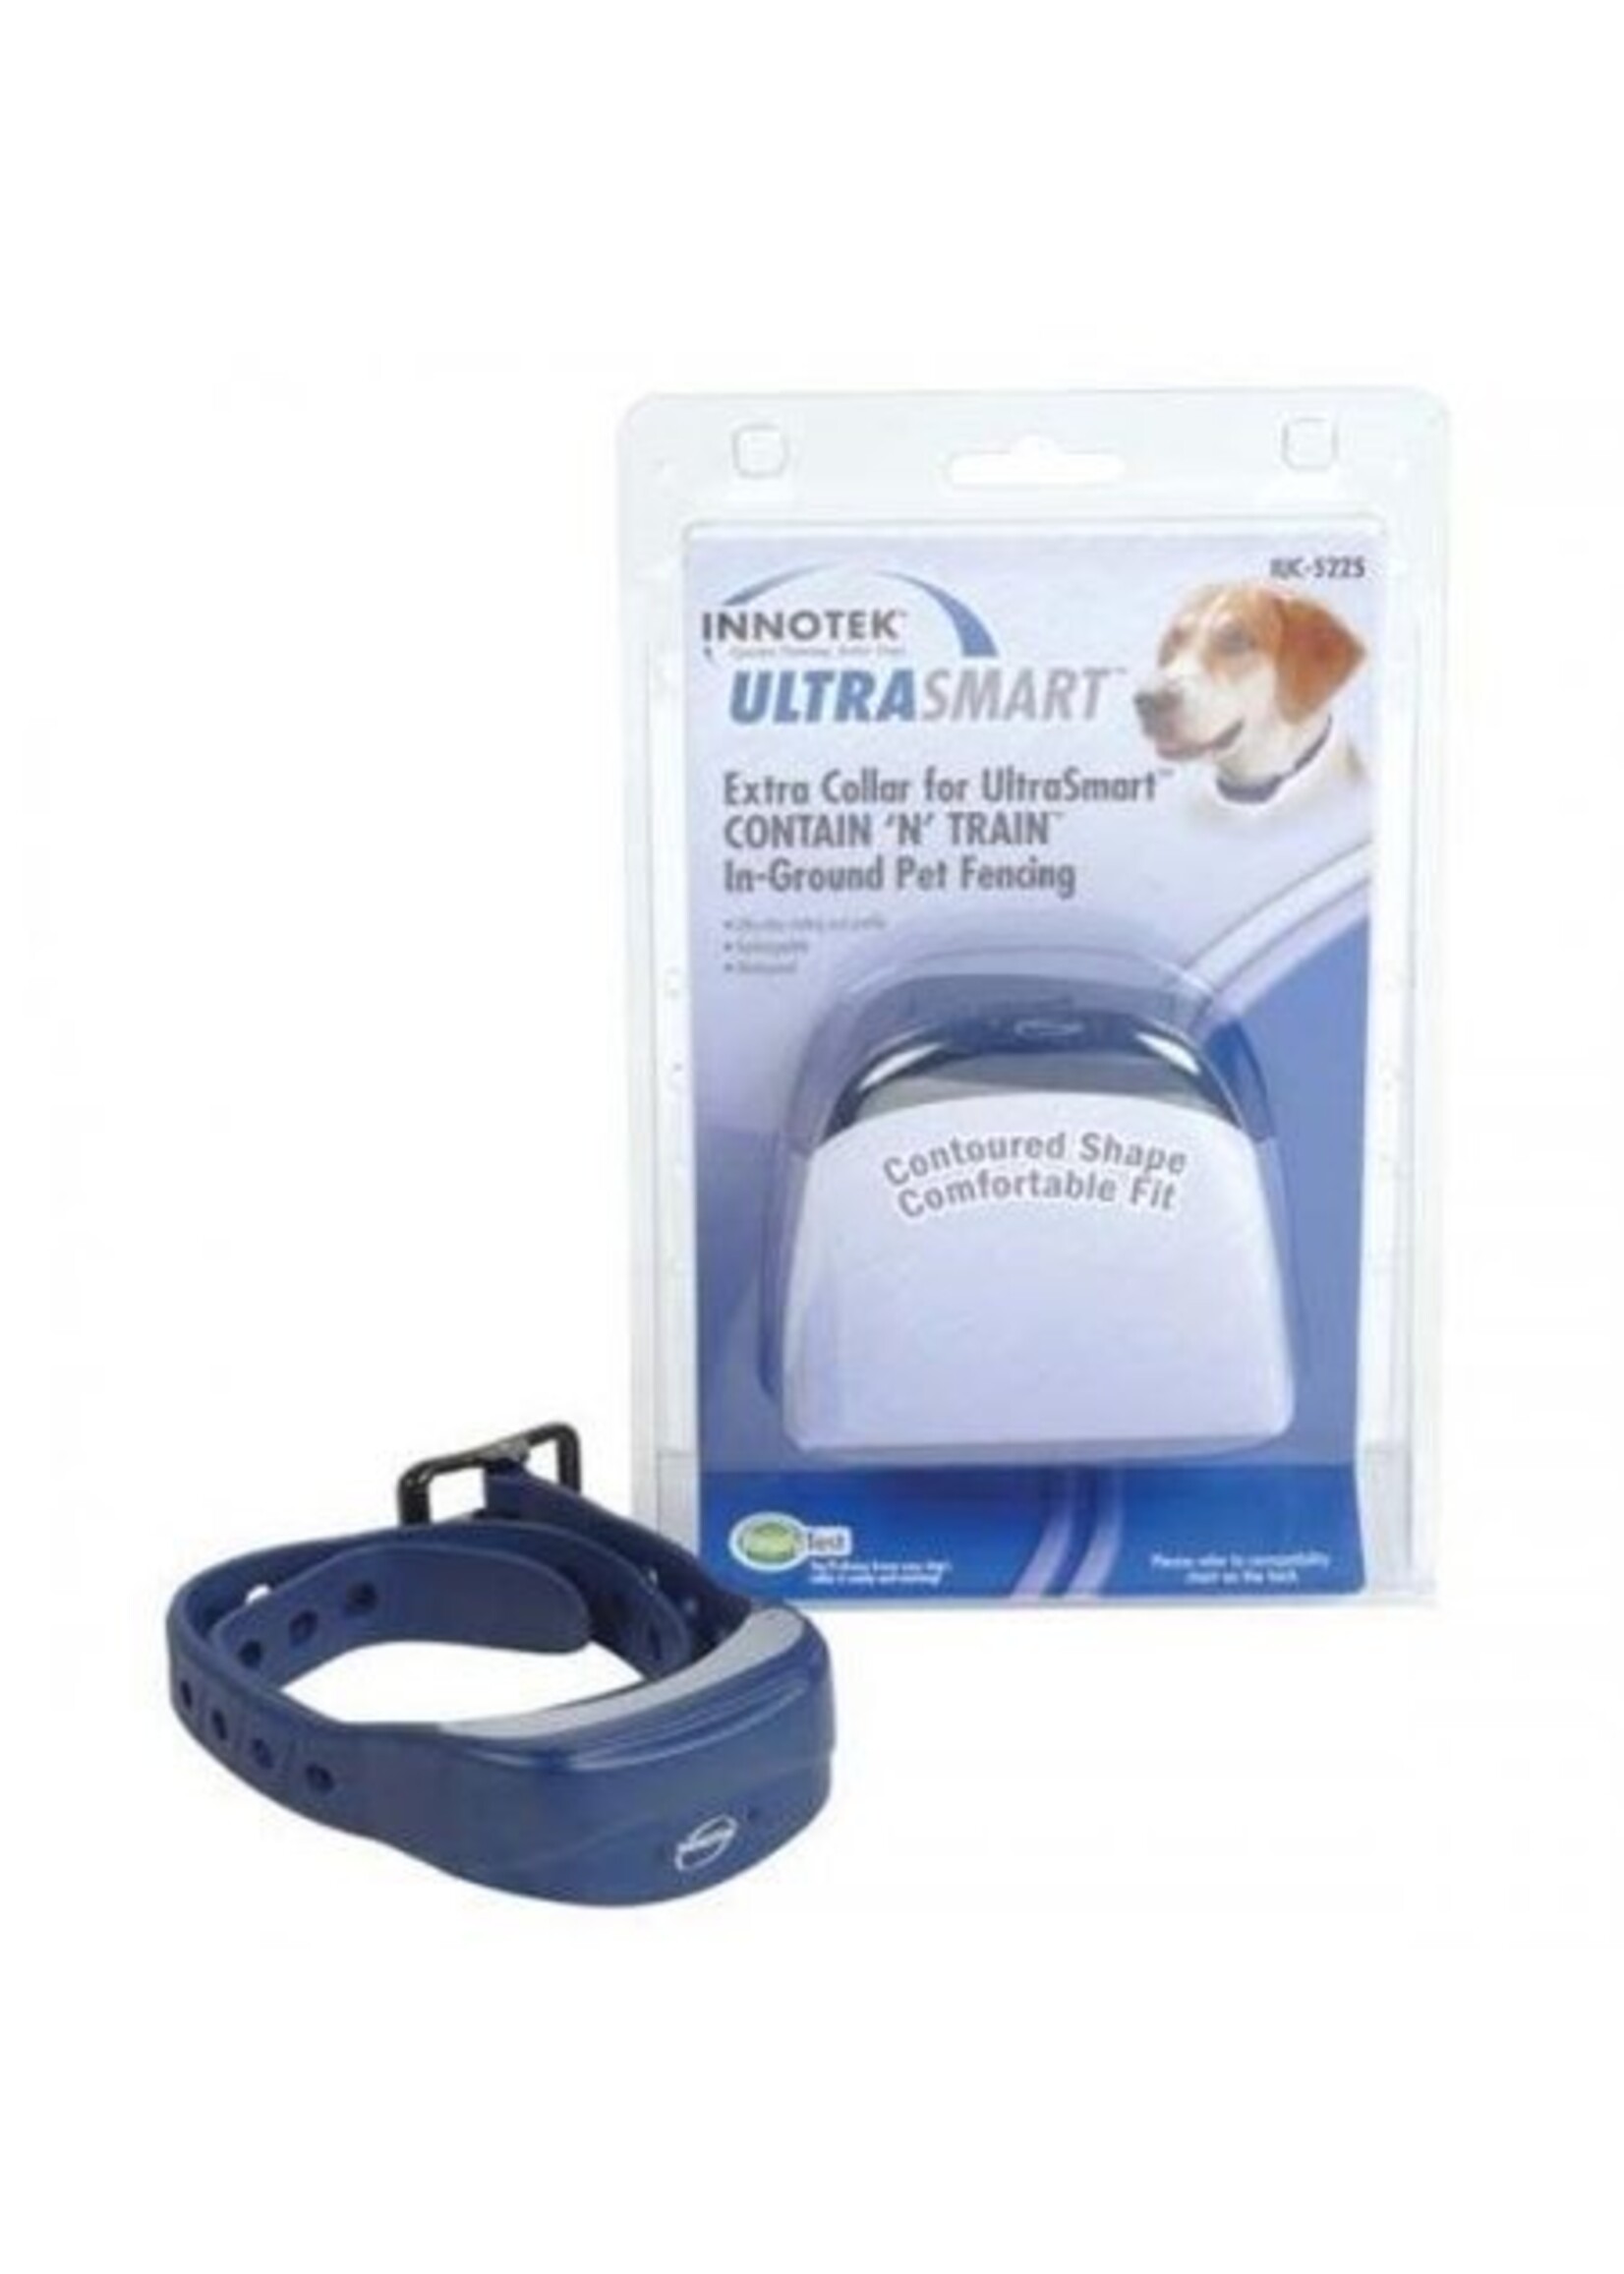 Innotek Ultra Smart Extra Collar for Contain N Train IUC - 5225